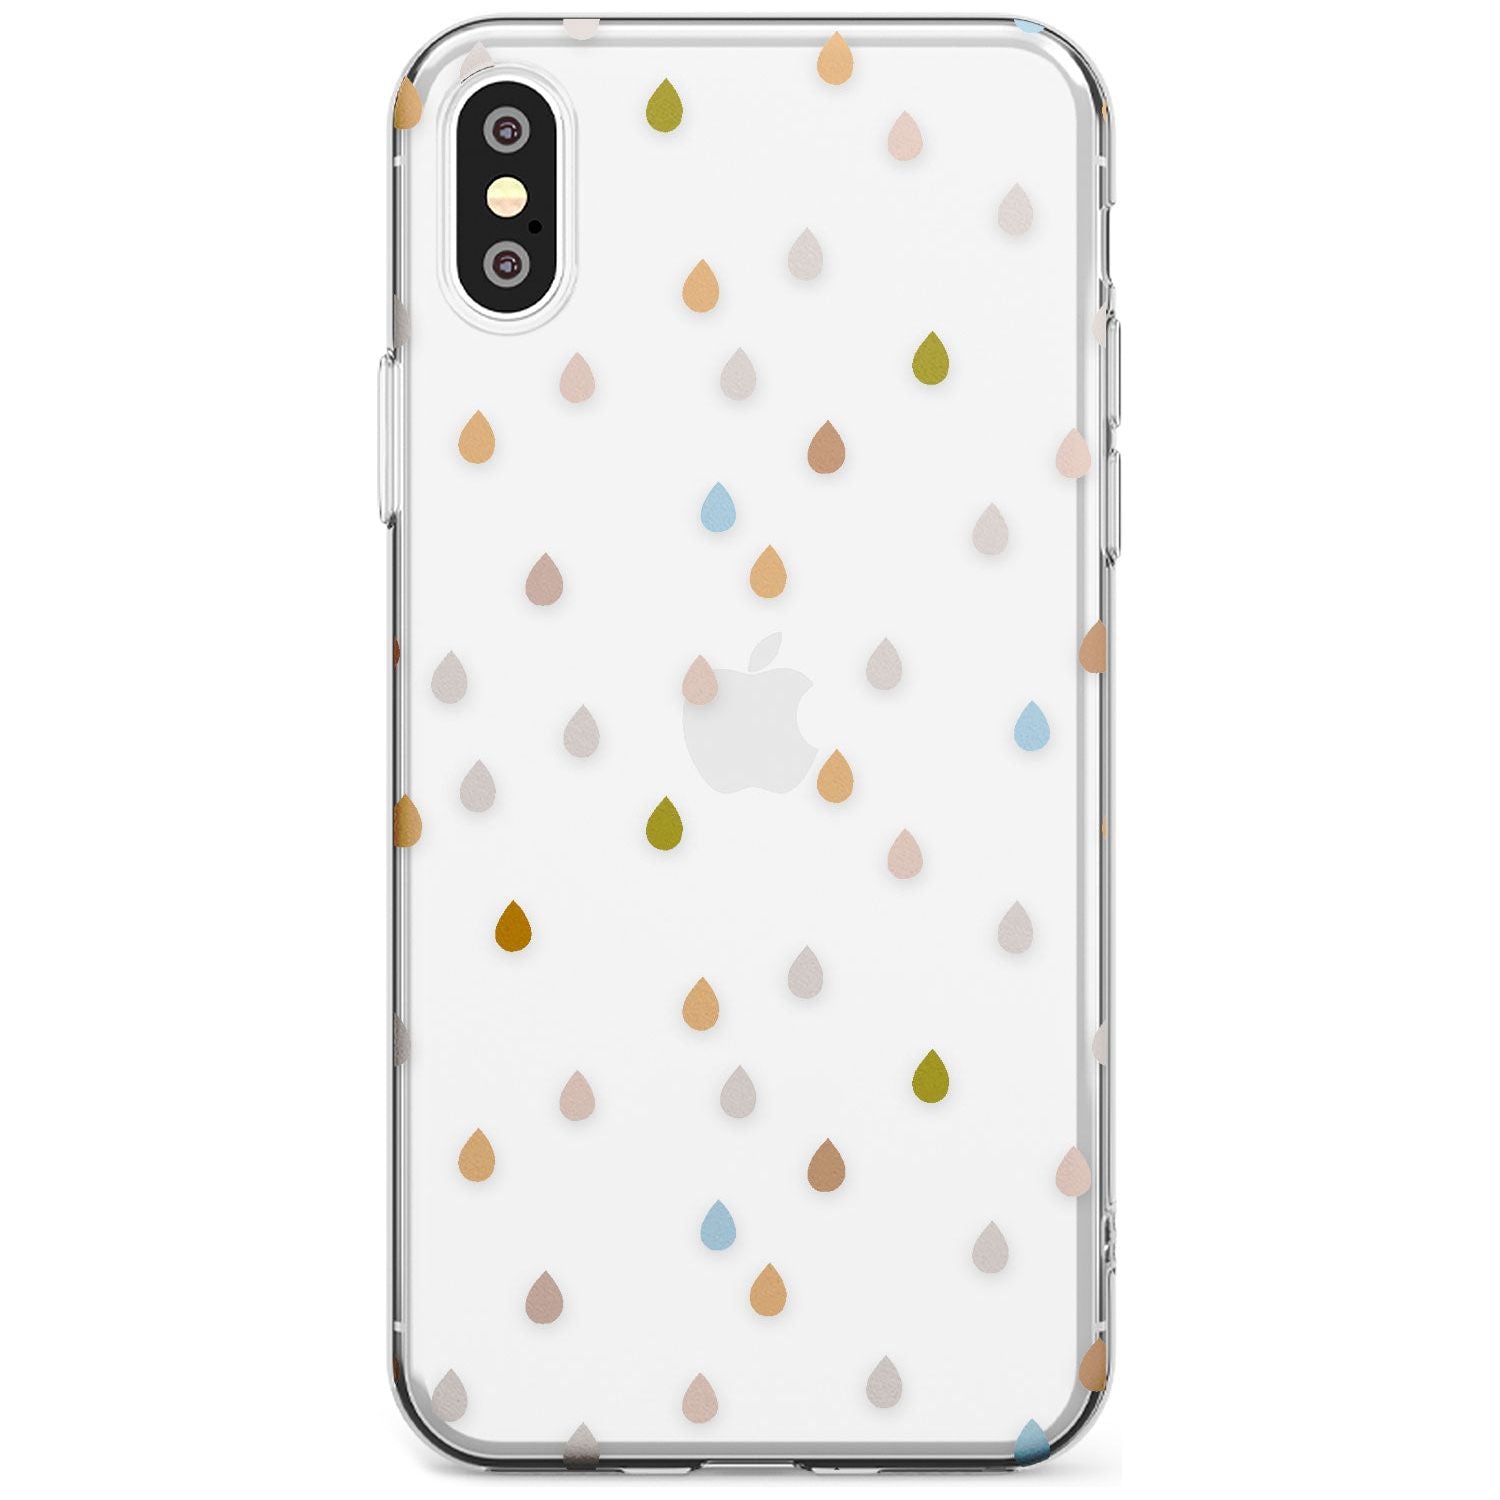 Raindrops Black Impact Phone Case for iPhone X XS Max XR